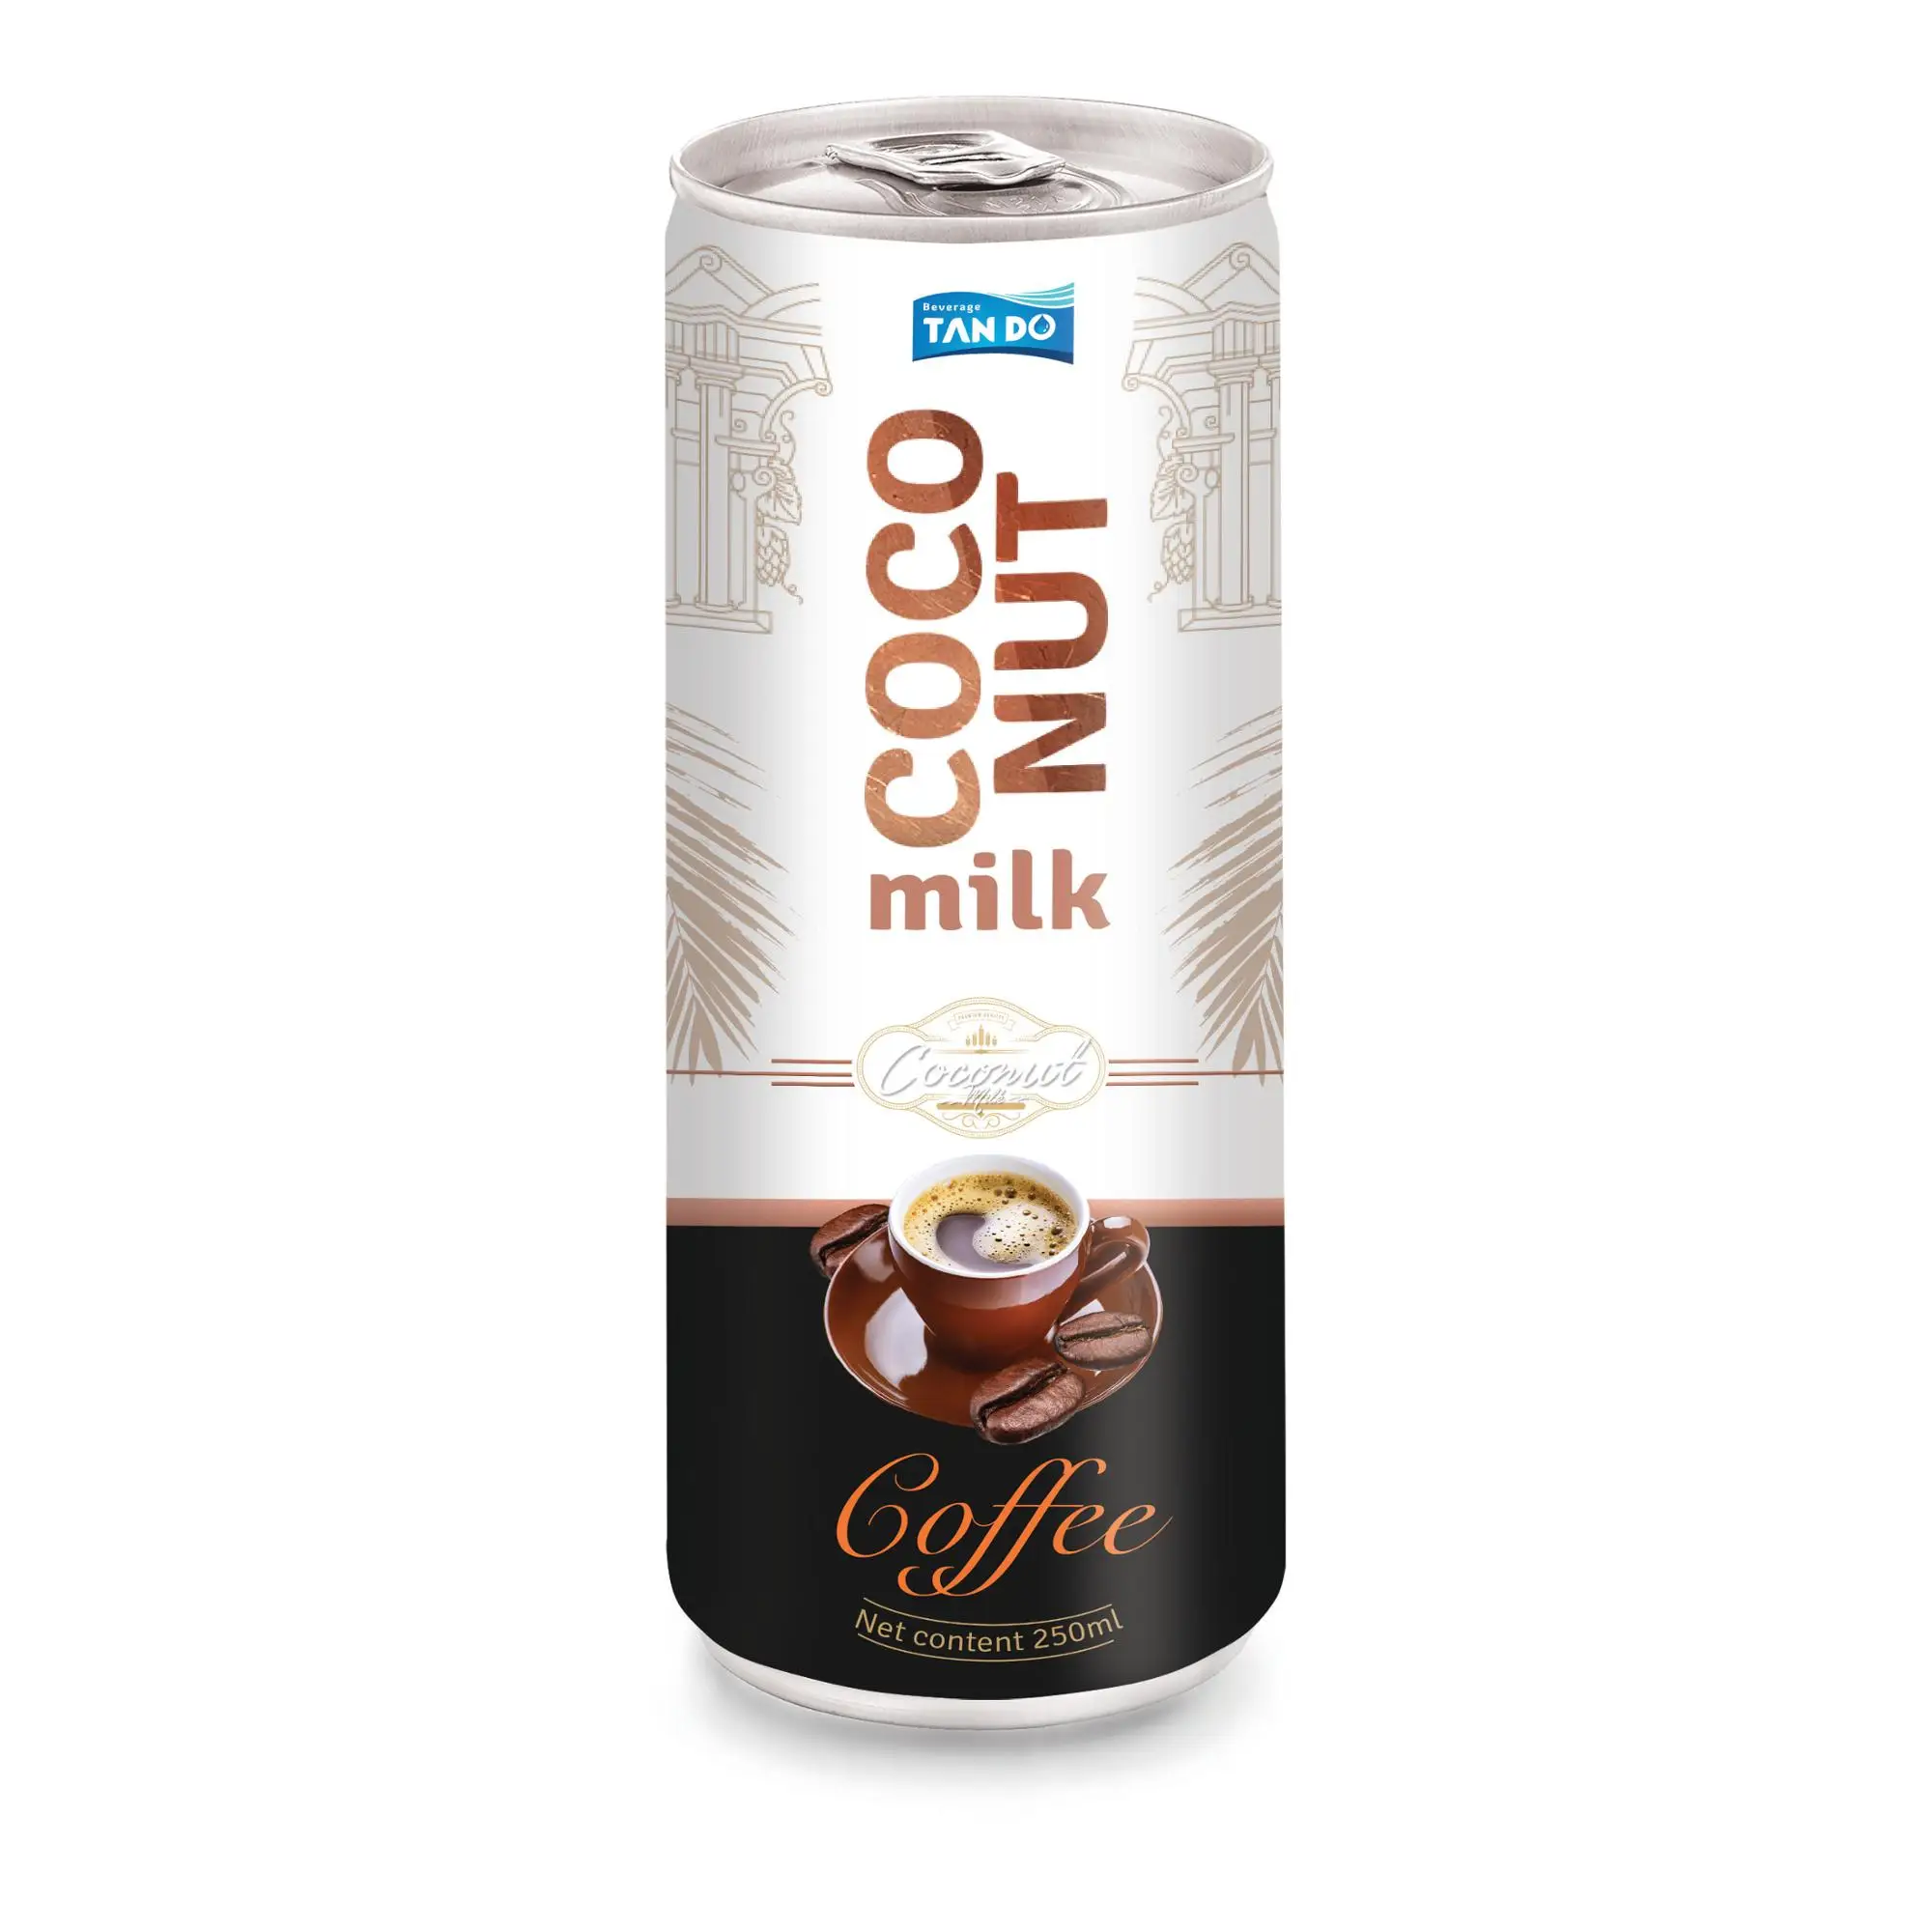 Instant Espresso coffee 250ml NFC Iced Coffee 7 % Brix Aluminum Can Packaging with 24 Months Shelf Life